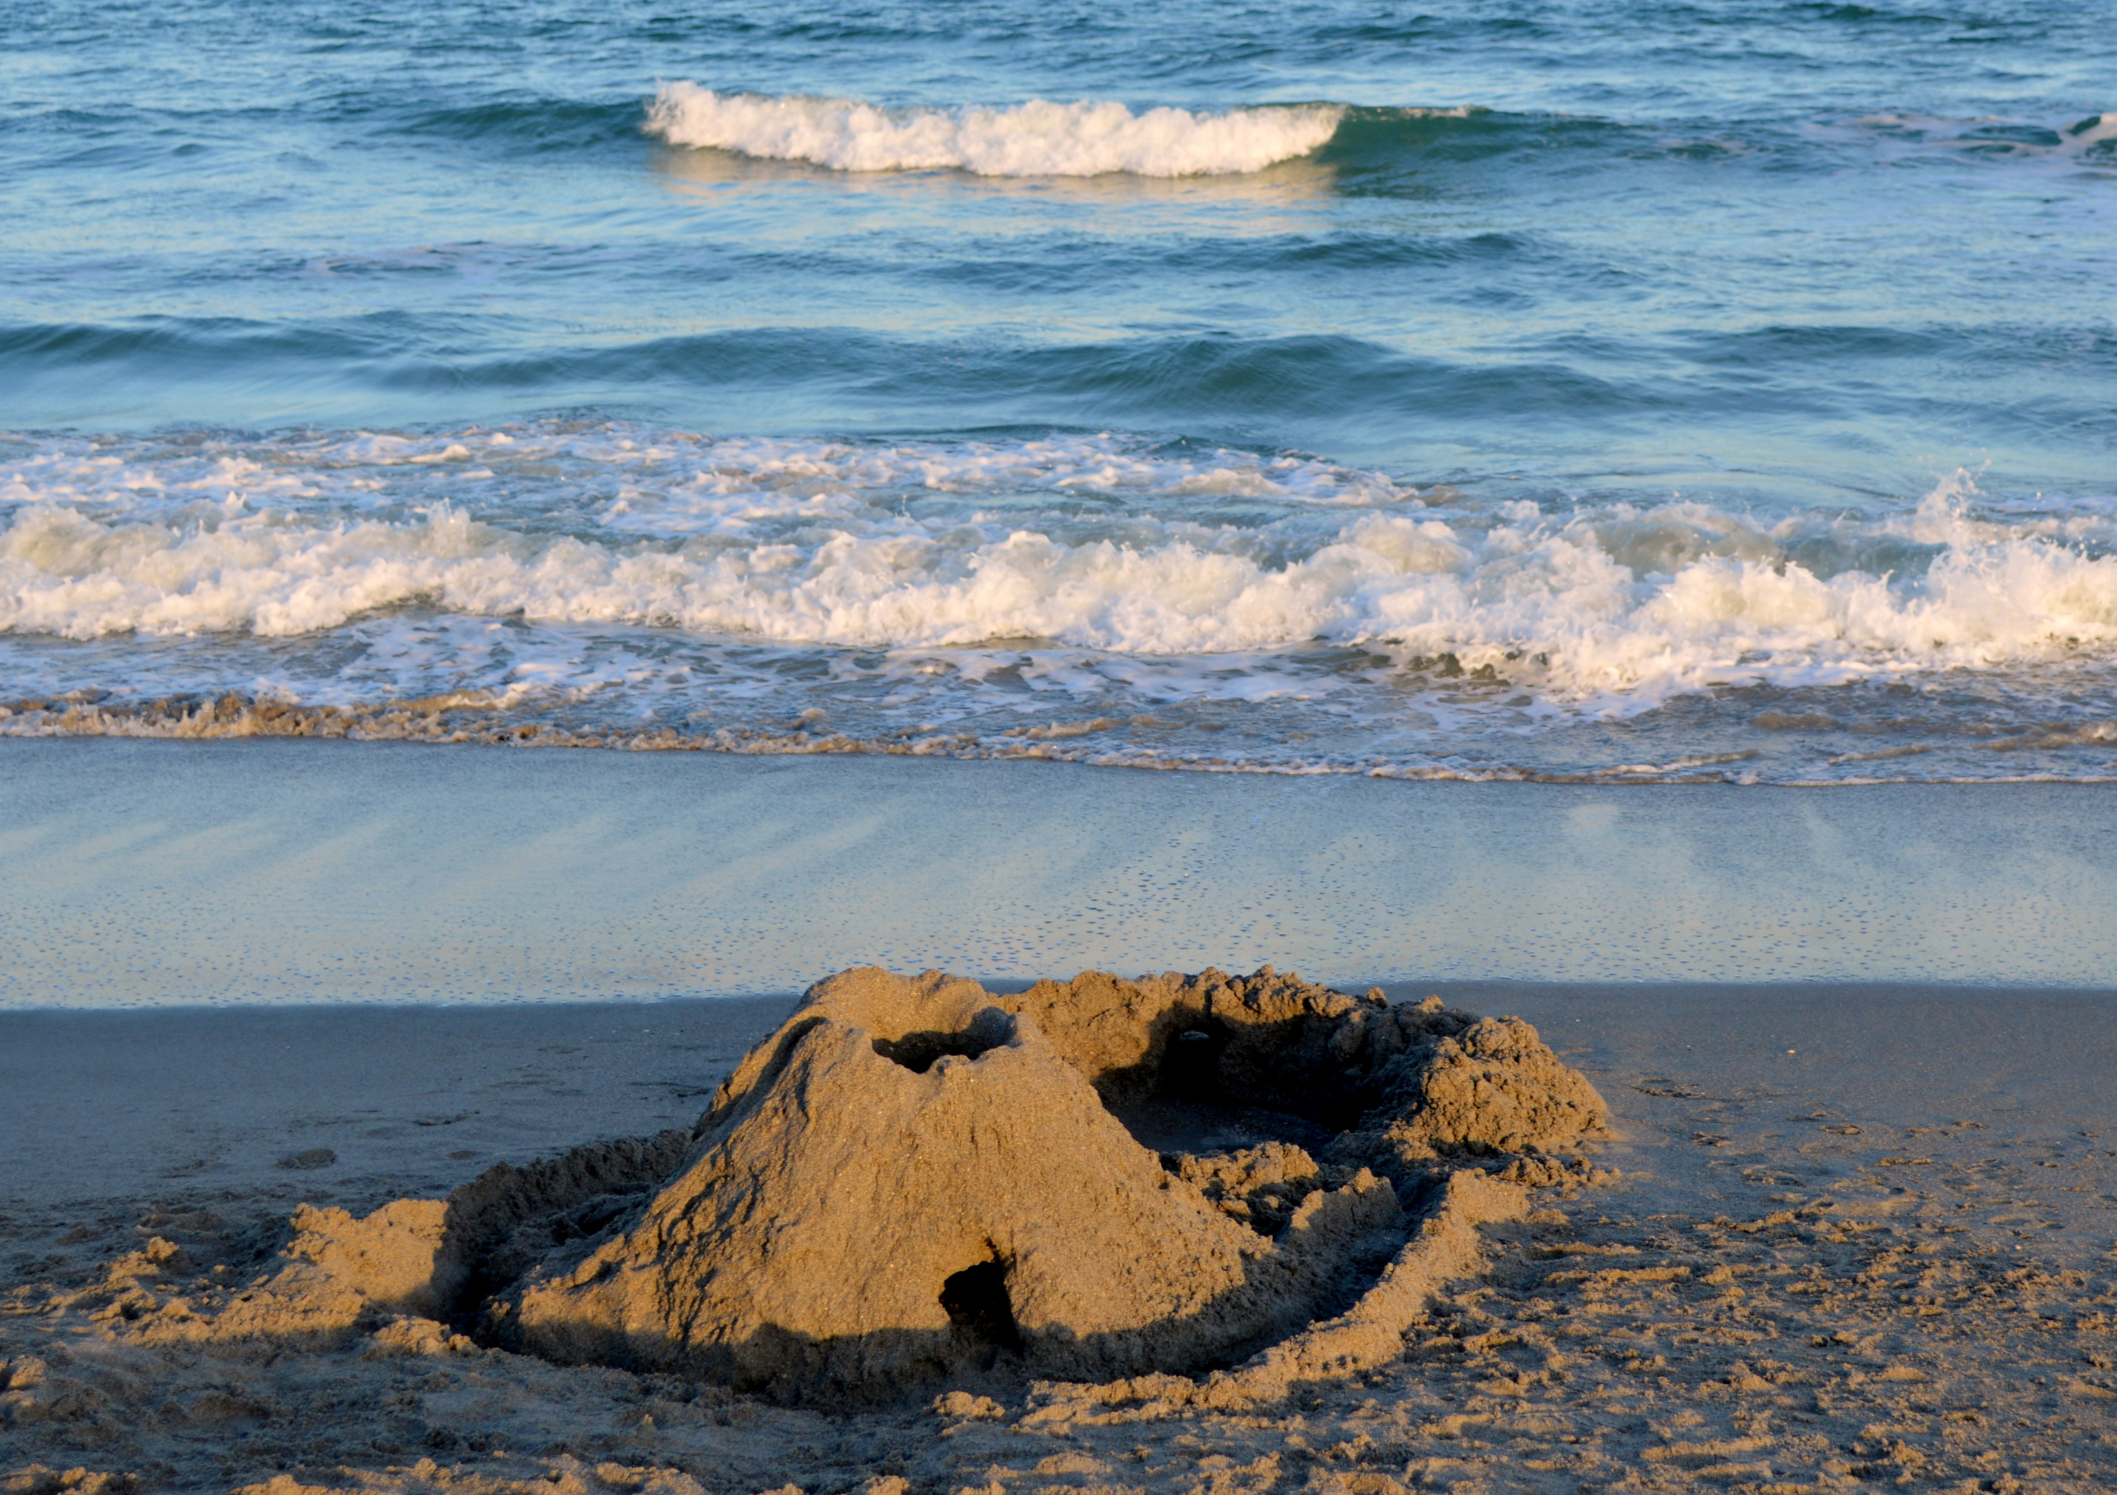 Sandcastle-with-water-approaching